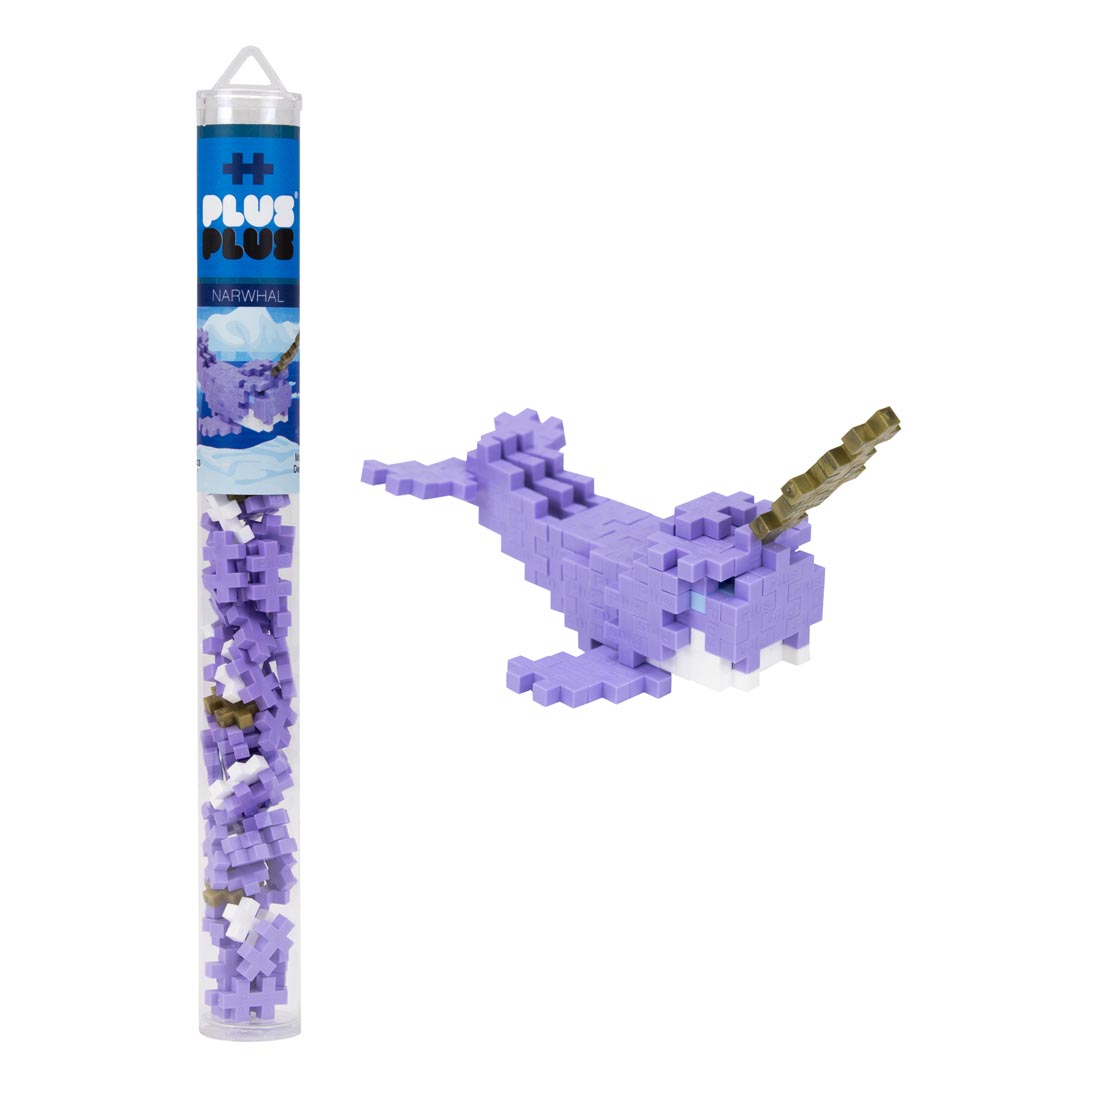 Plus-Plus 70-Piece Narwhal Tube beside a completed sample creation